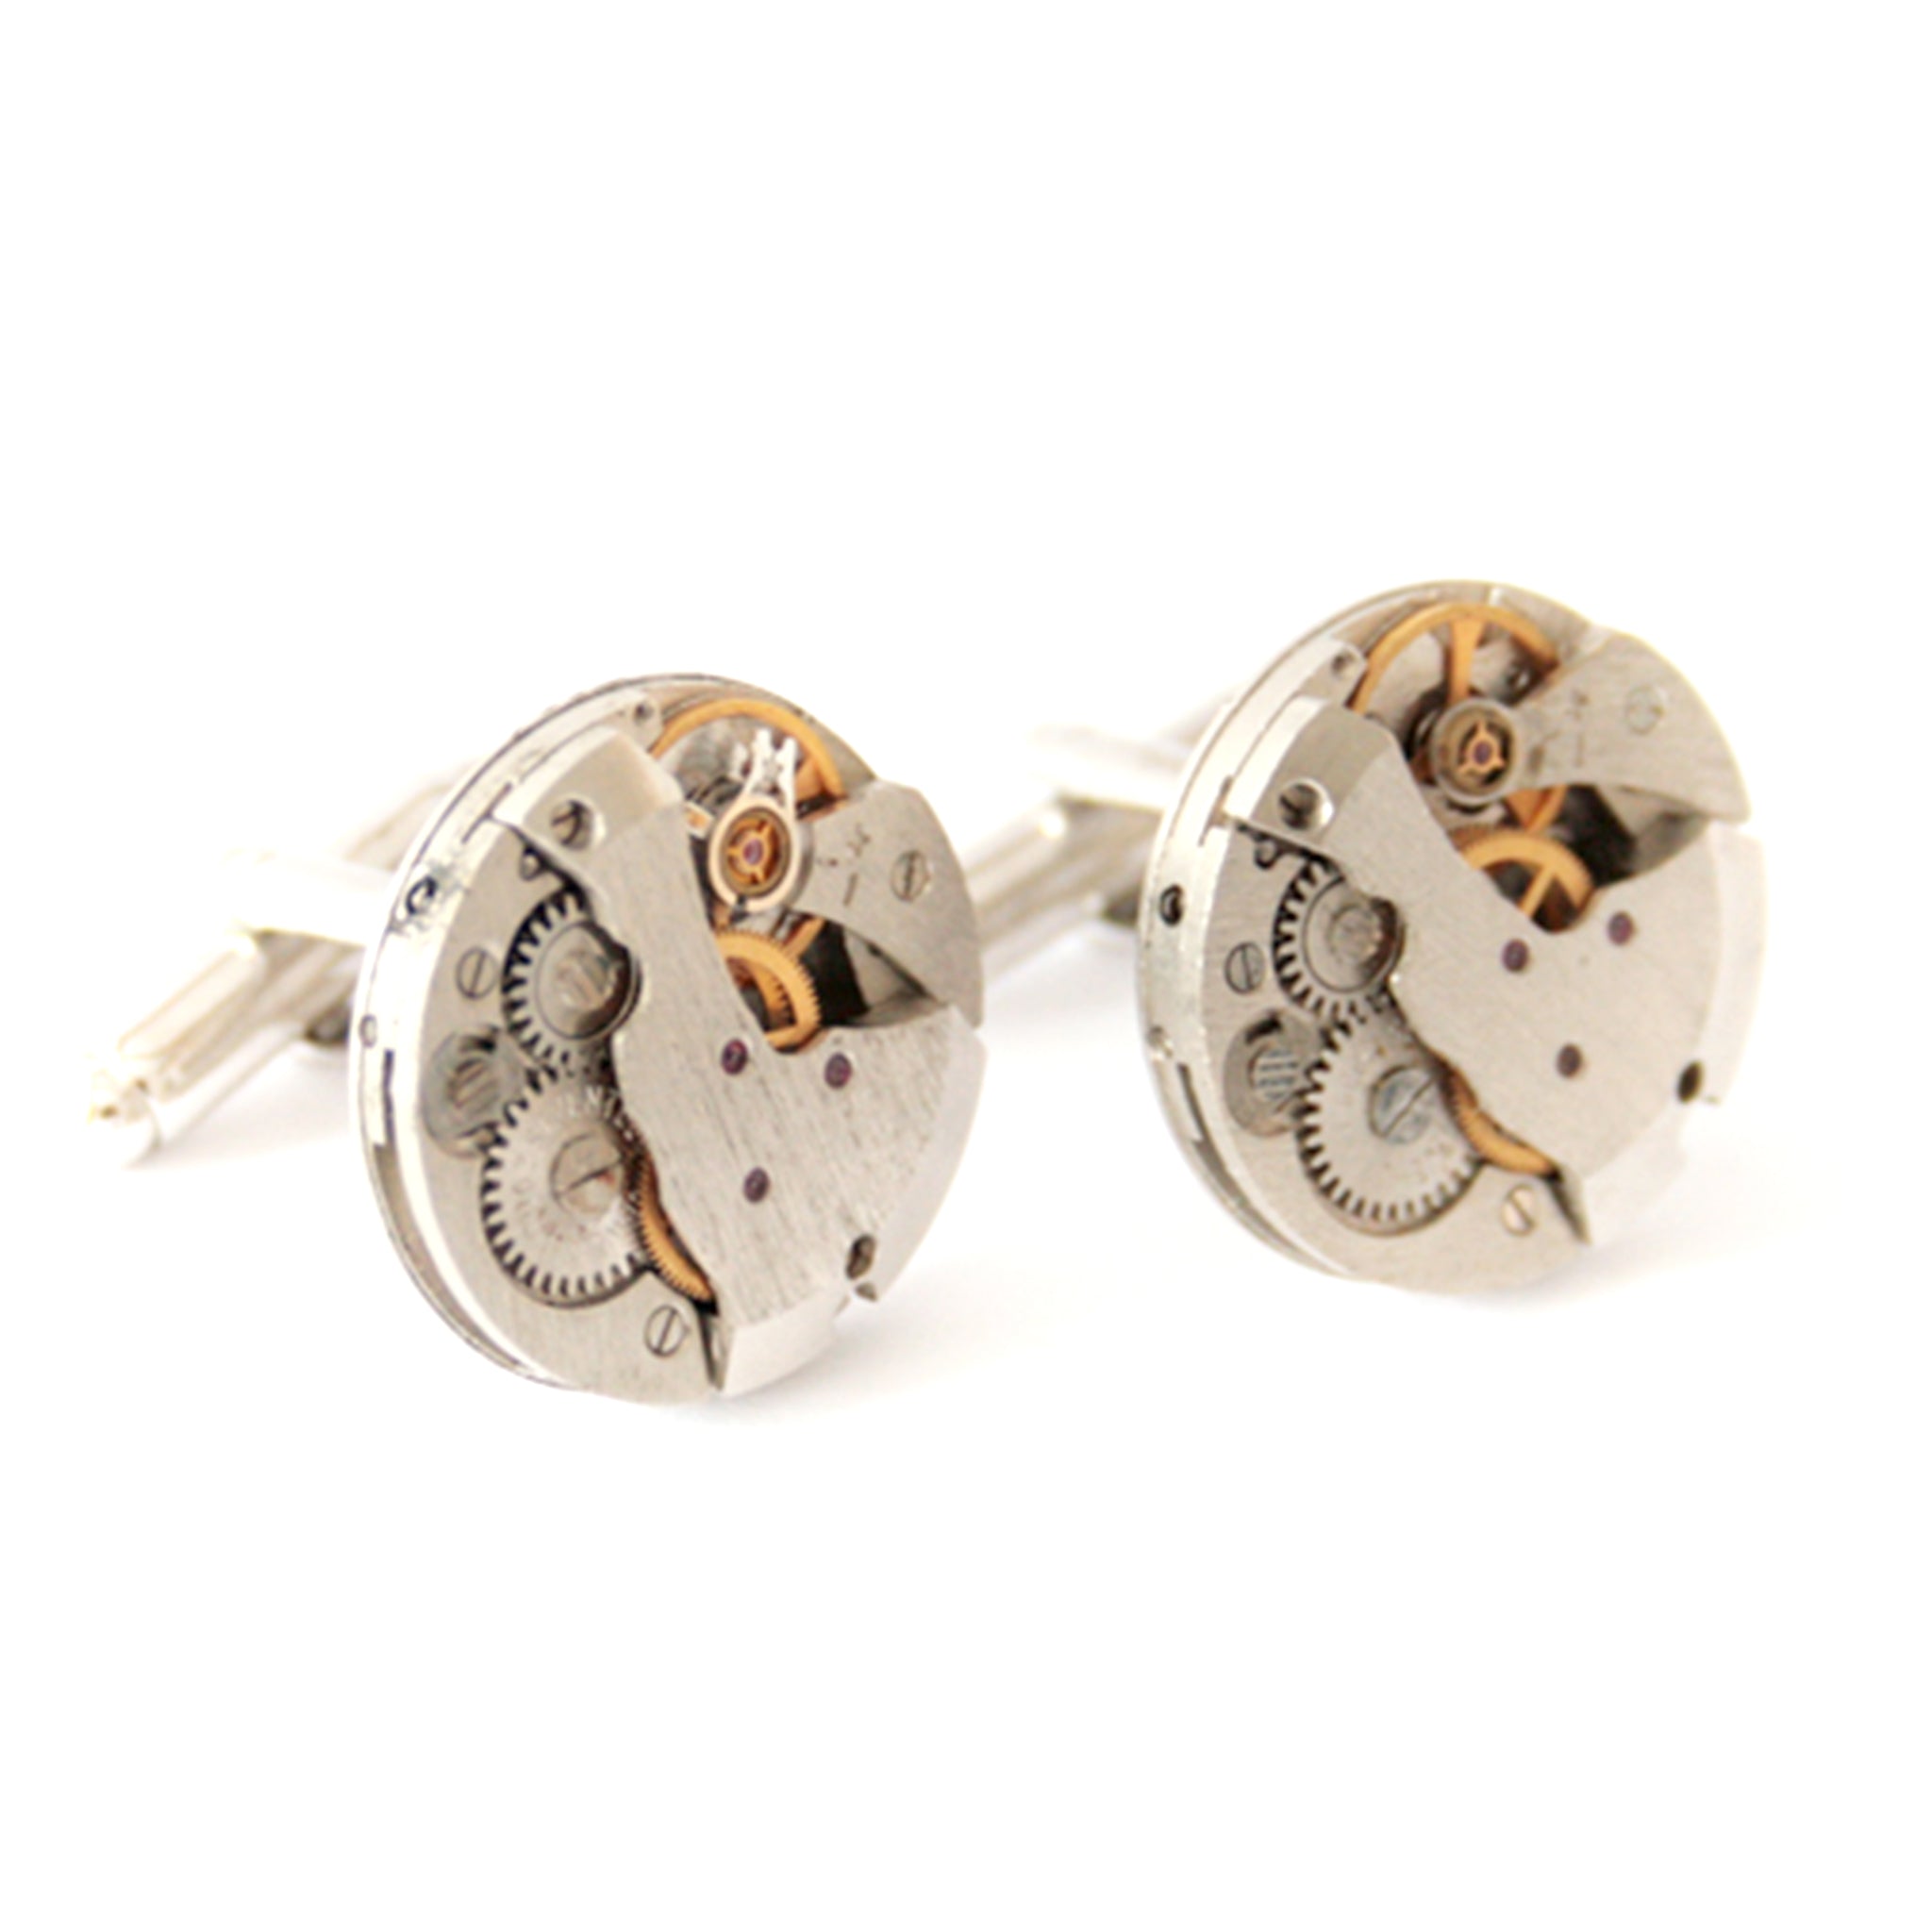 Novelty Watch Cufflinks made of real watches